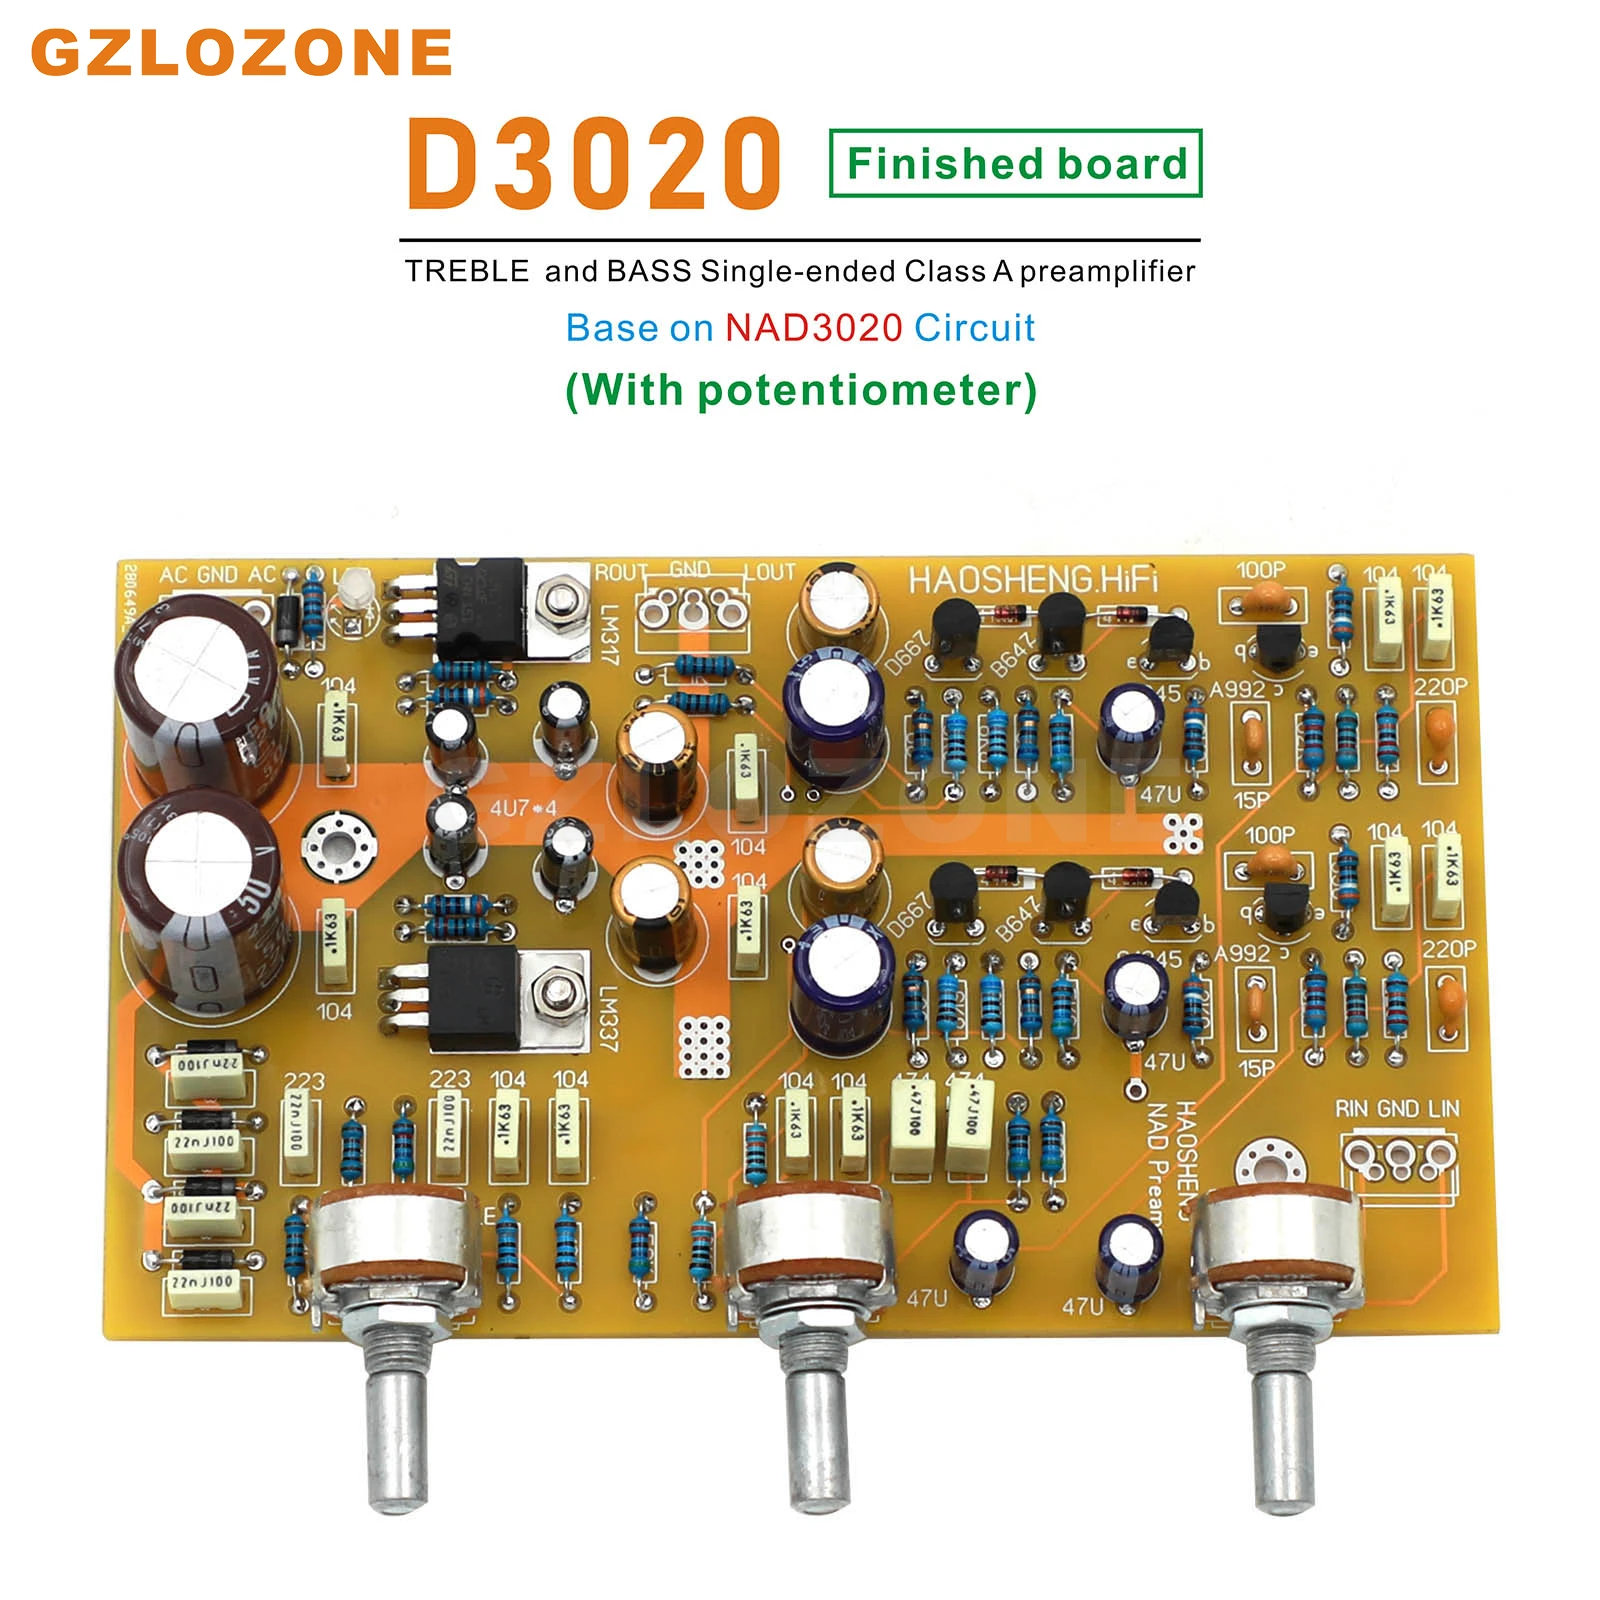 

D3020 TREBLE and BASS Single-ended Class A preamplifier Base on NAD3020 circuit DIY Kit/Finished board